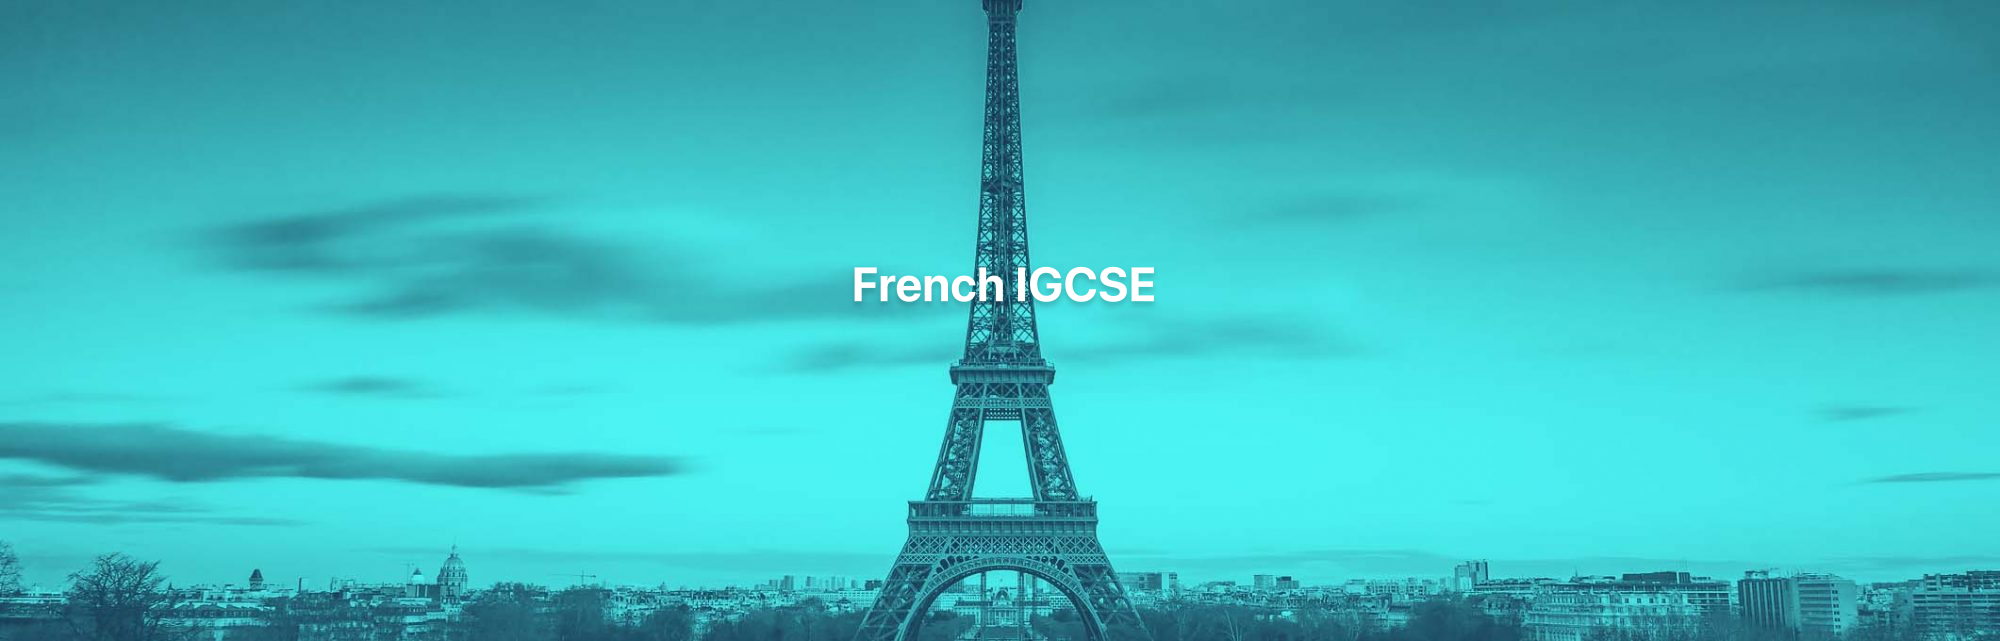 French IGCSE Distance Learning Course by Oxbridge